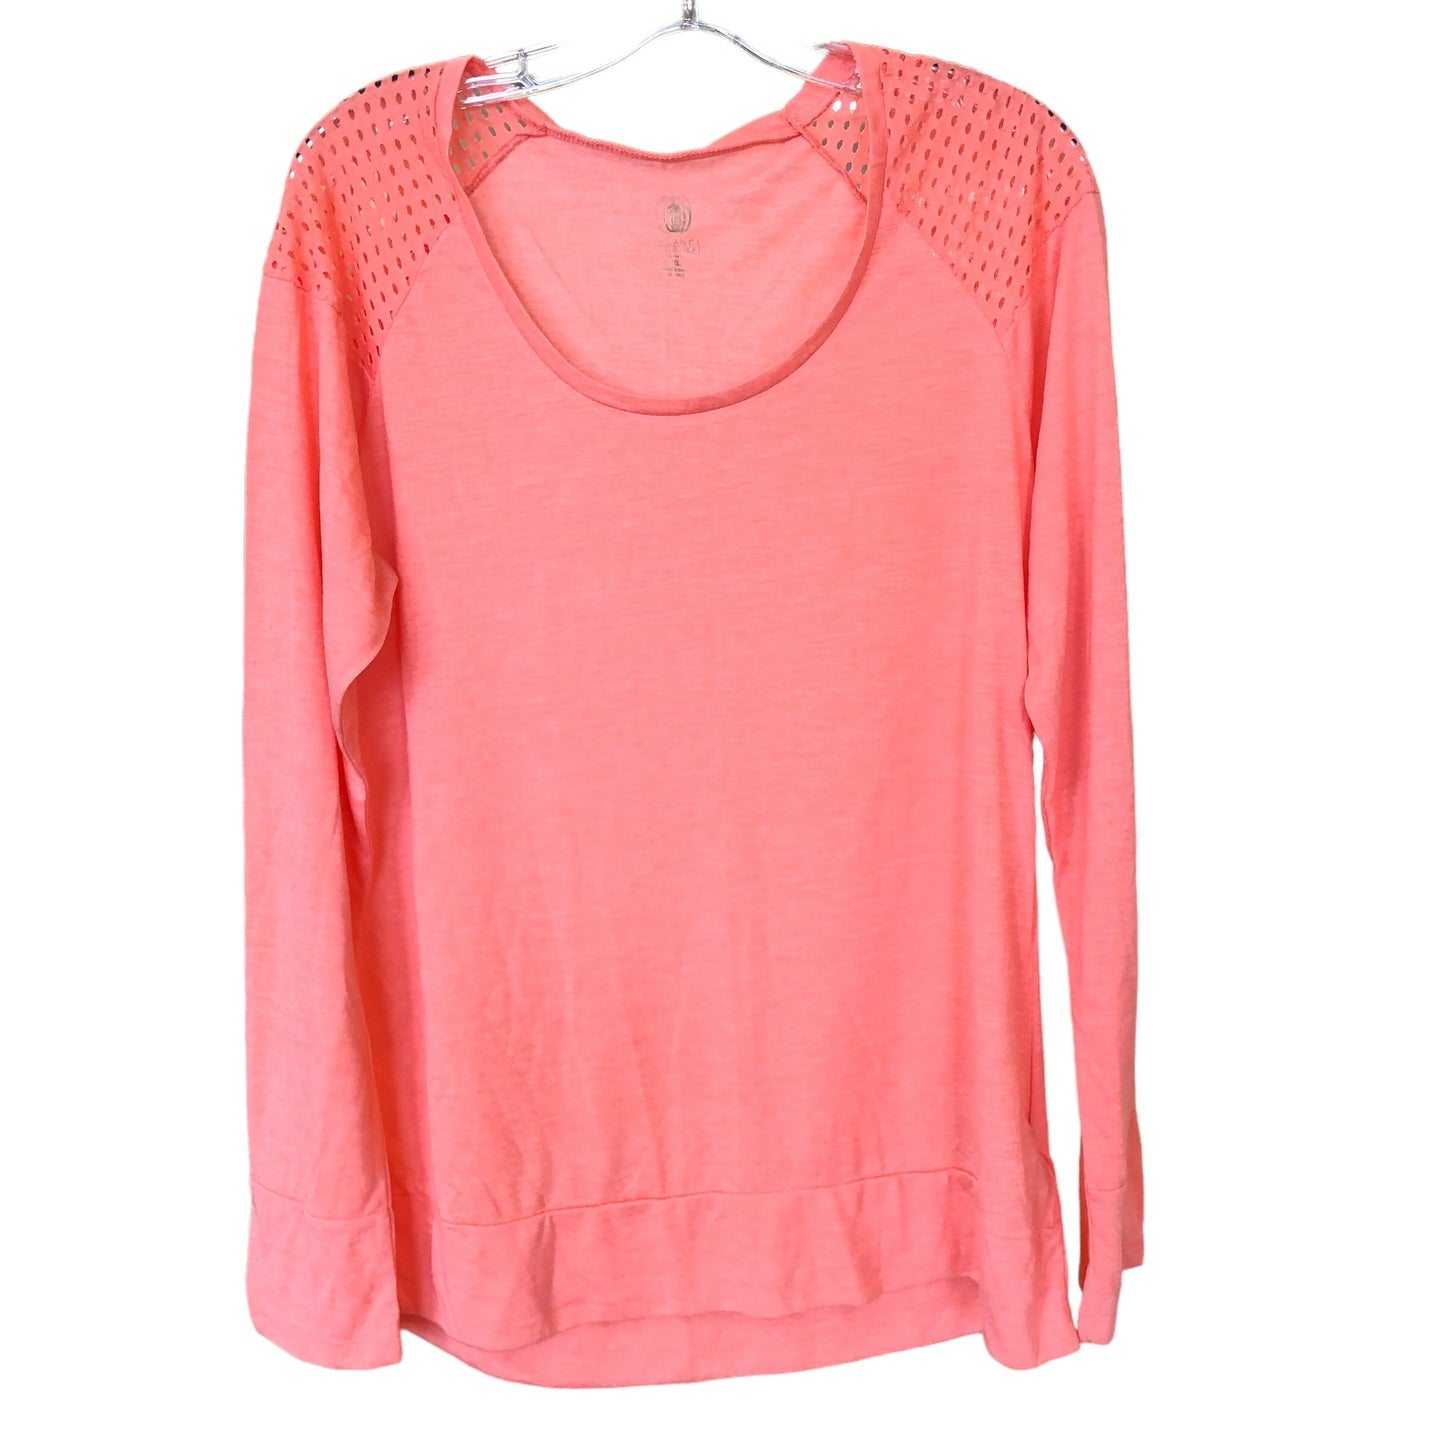 Coral Top Long Sleeve Balance Collection, Size Xl